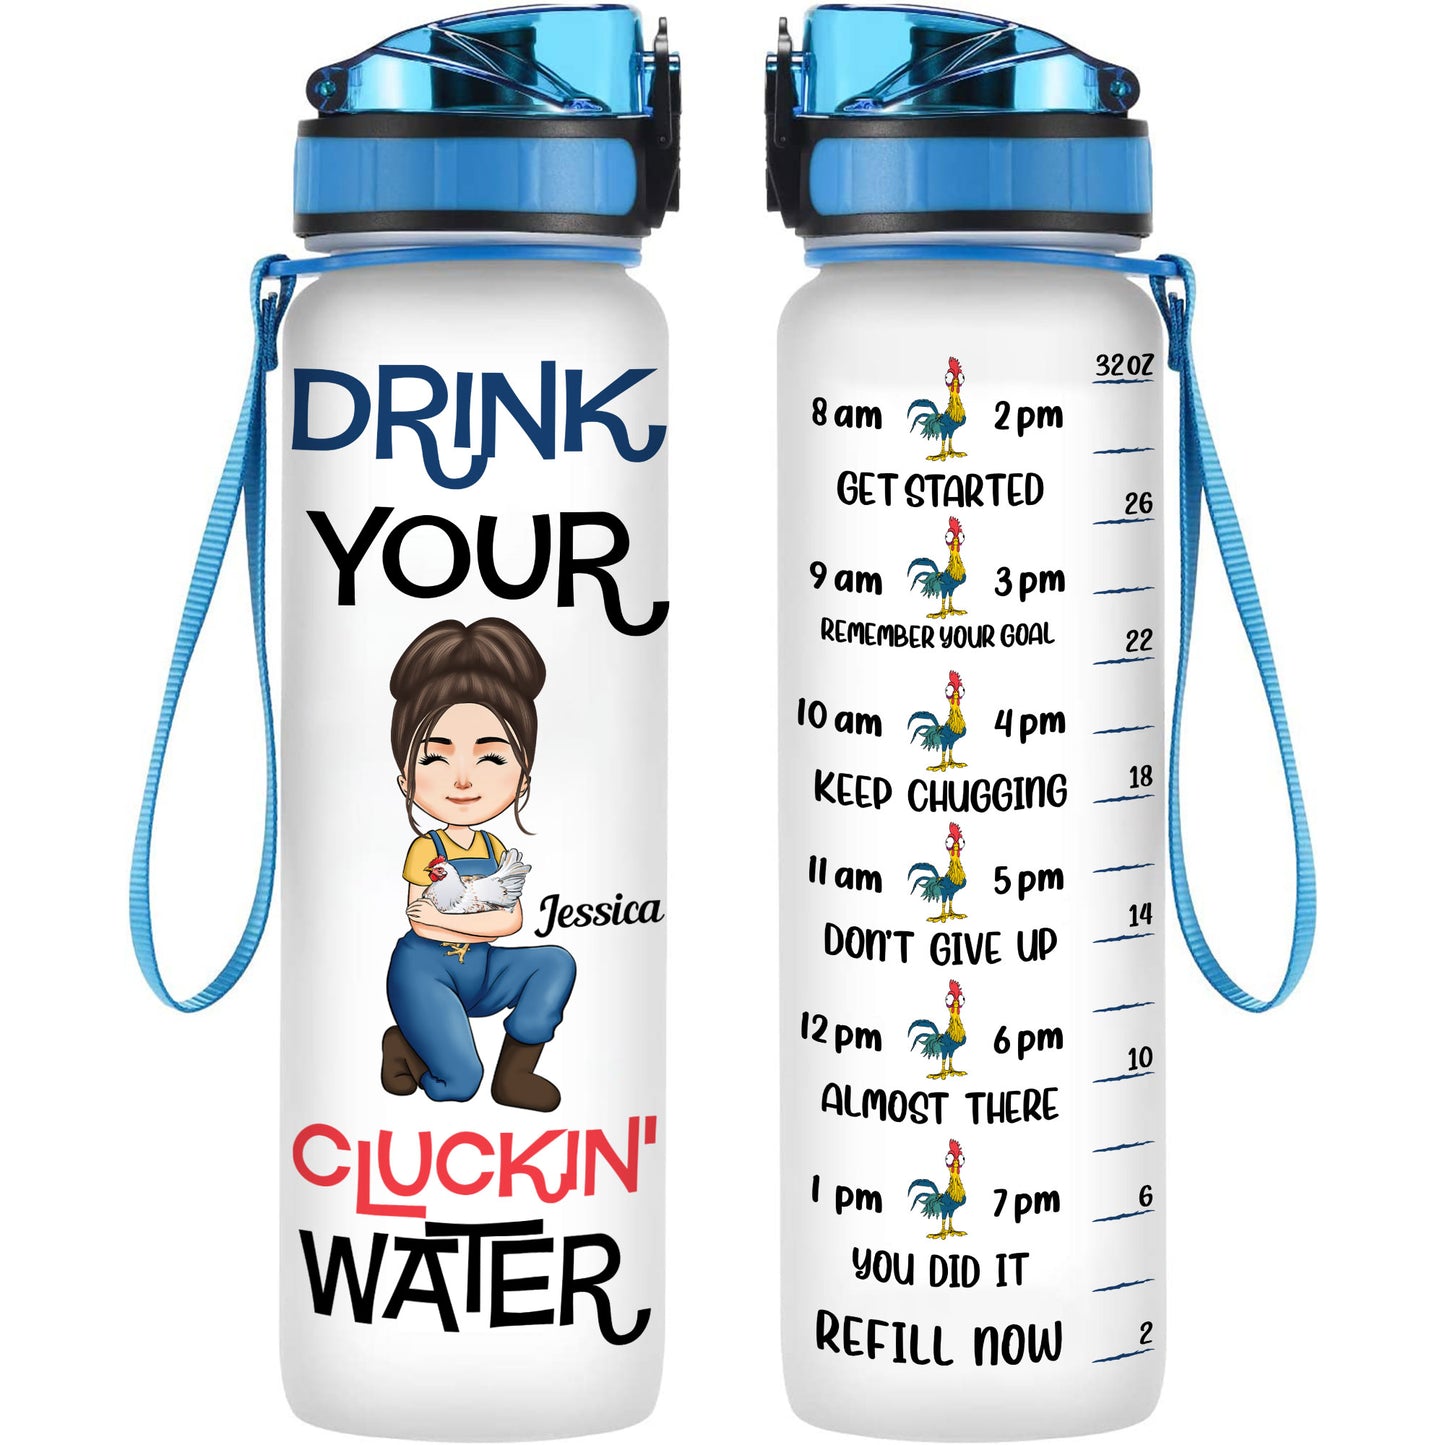 Drink Your Cluckin' Water - Personalized Water Bottle With Time Marker - Birthday, Motivation Gift For Her, Girl, Woman, Farmer